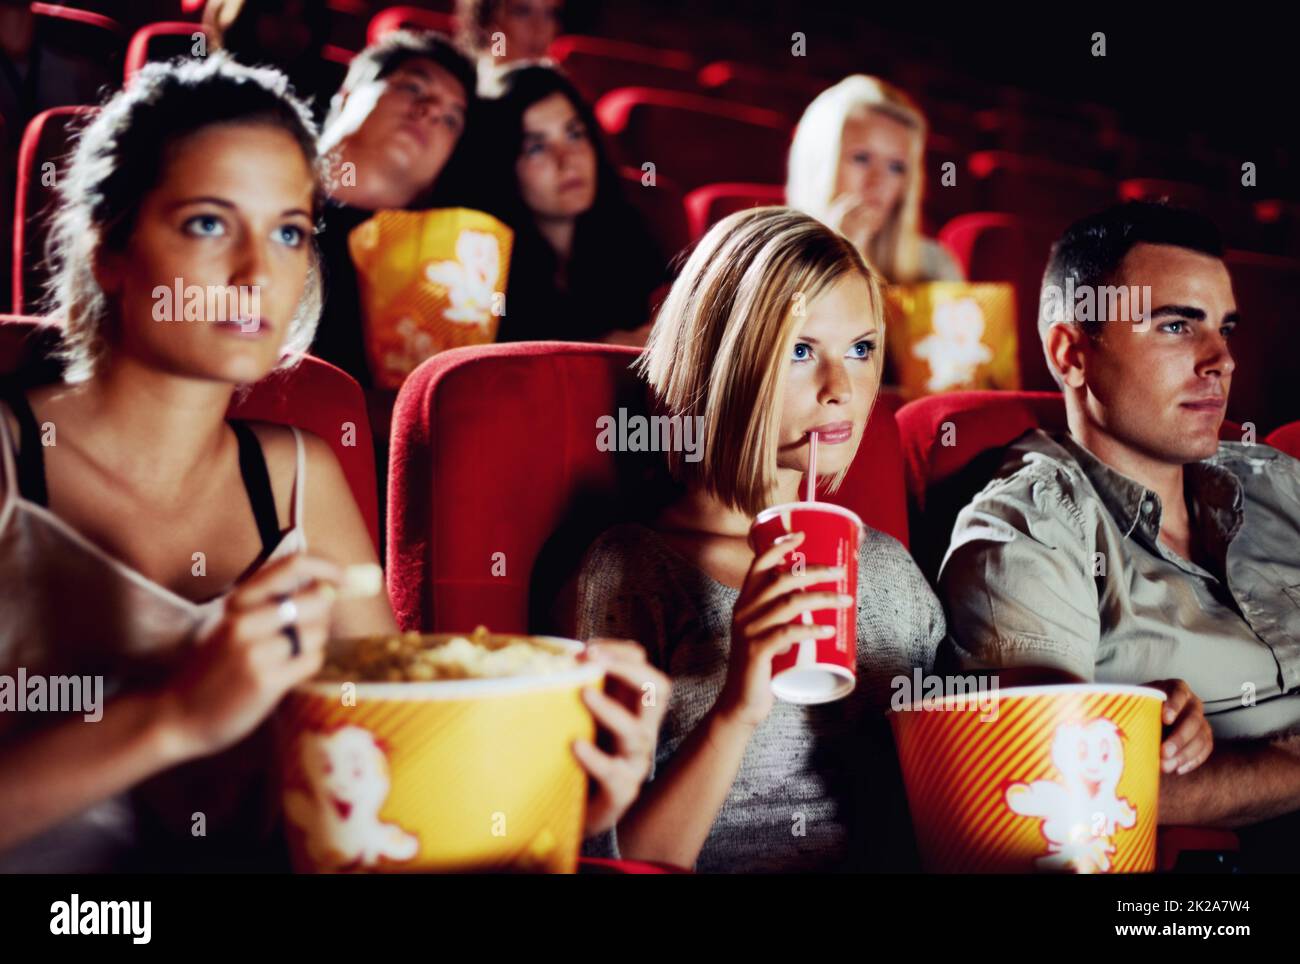 Sweet suspense. Friends sitting with refreshments and popcorn enjoying a movie together. Stock Photo